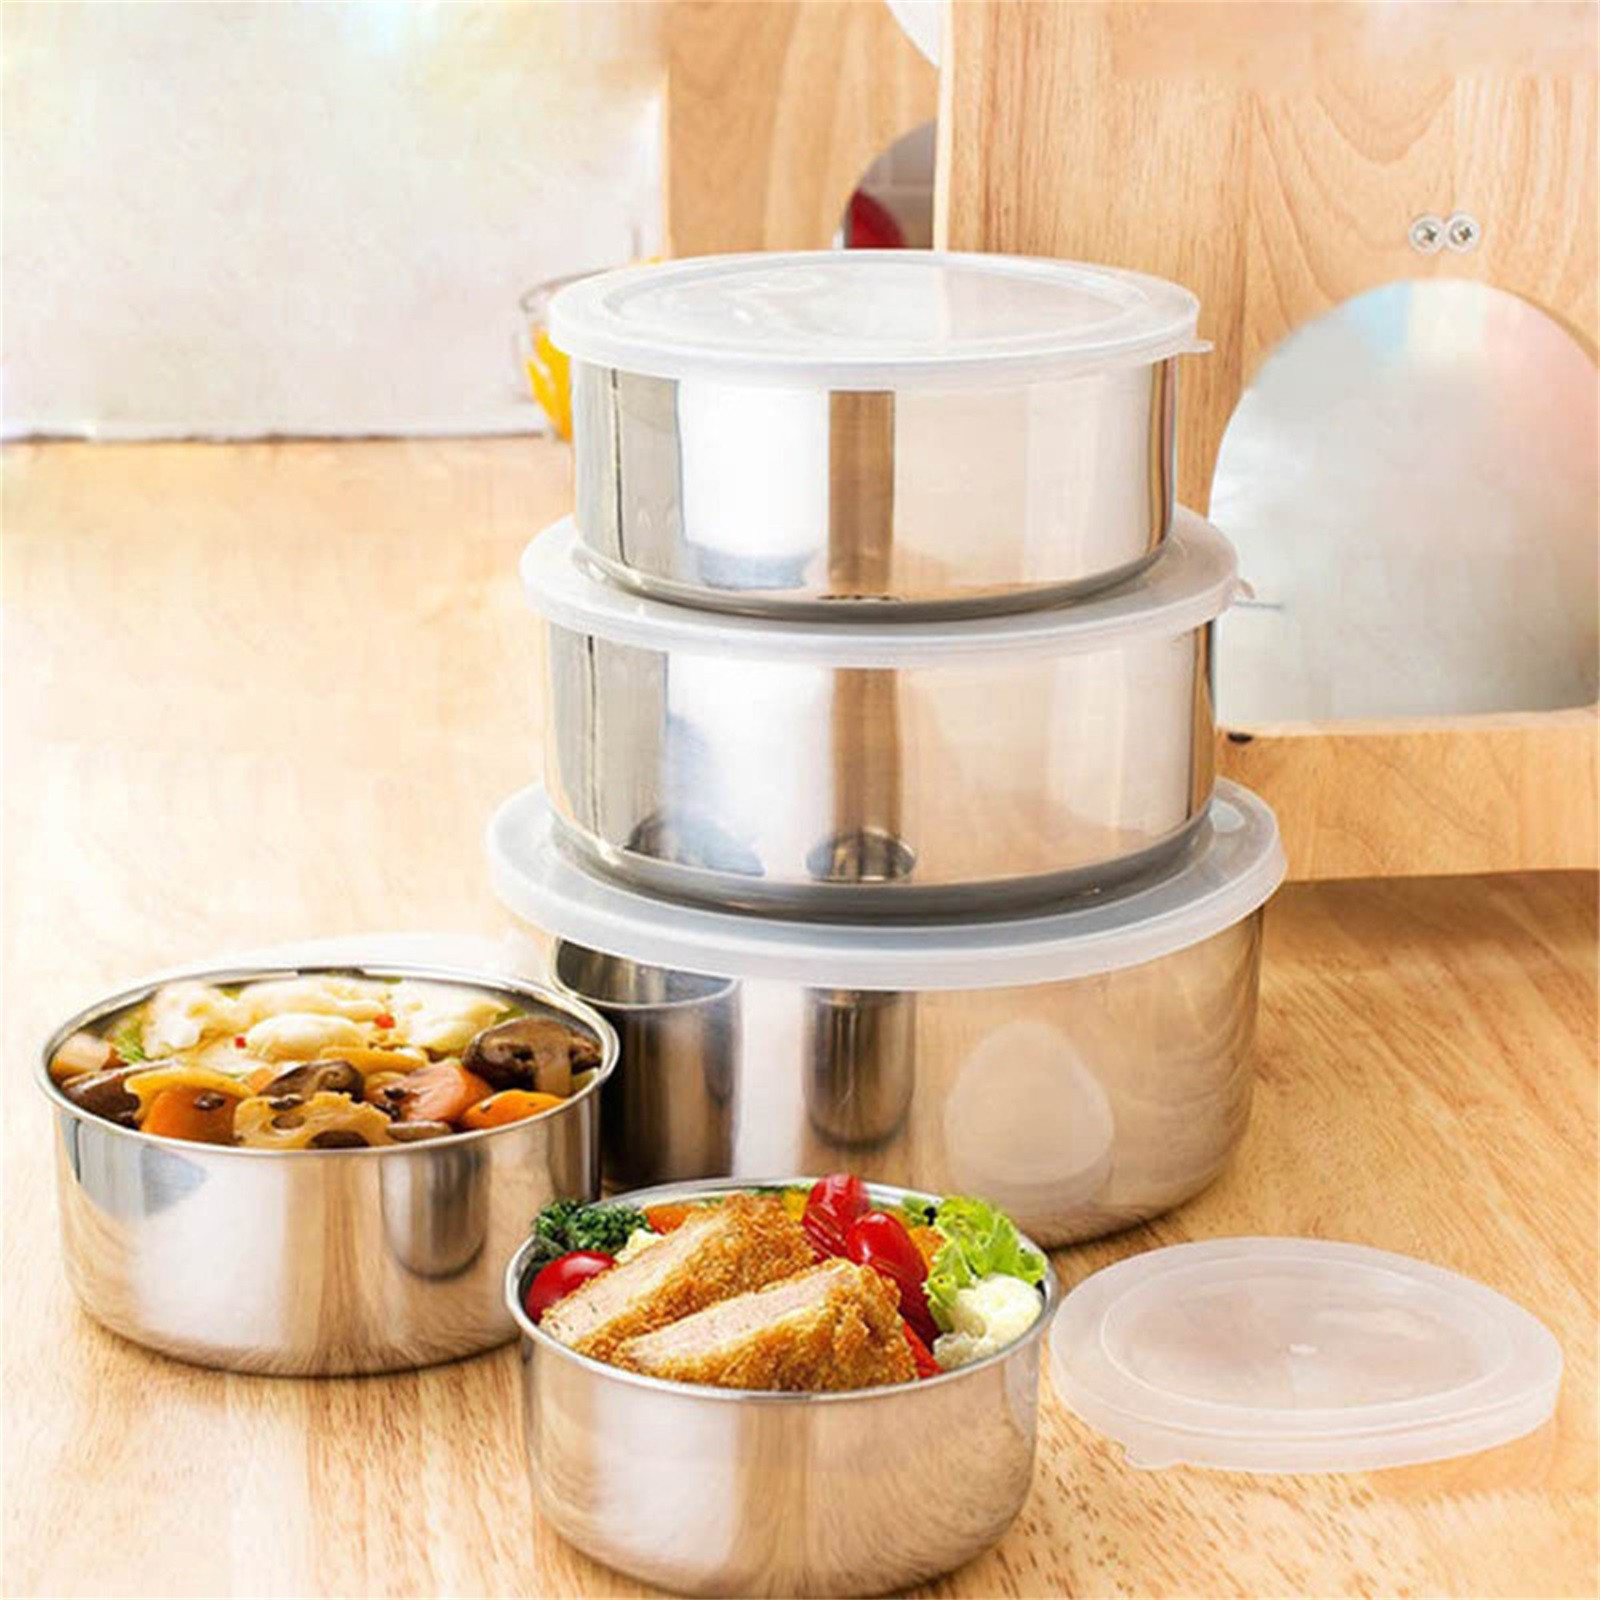 5 Pcs Stainless Steel Container with Lids - Stackable Canisters Sets for  The Kitchen - Refrigerator Organizing Containers Container Storage Mixing